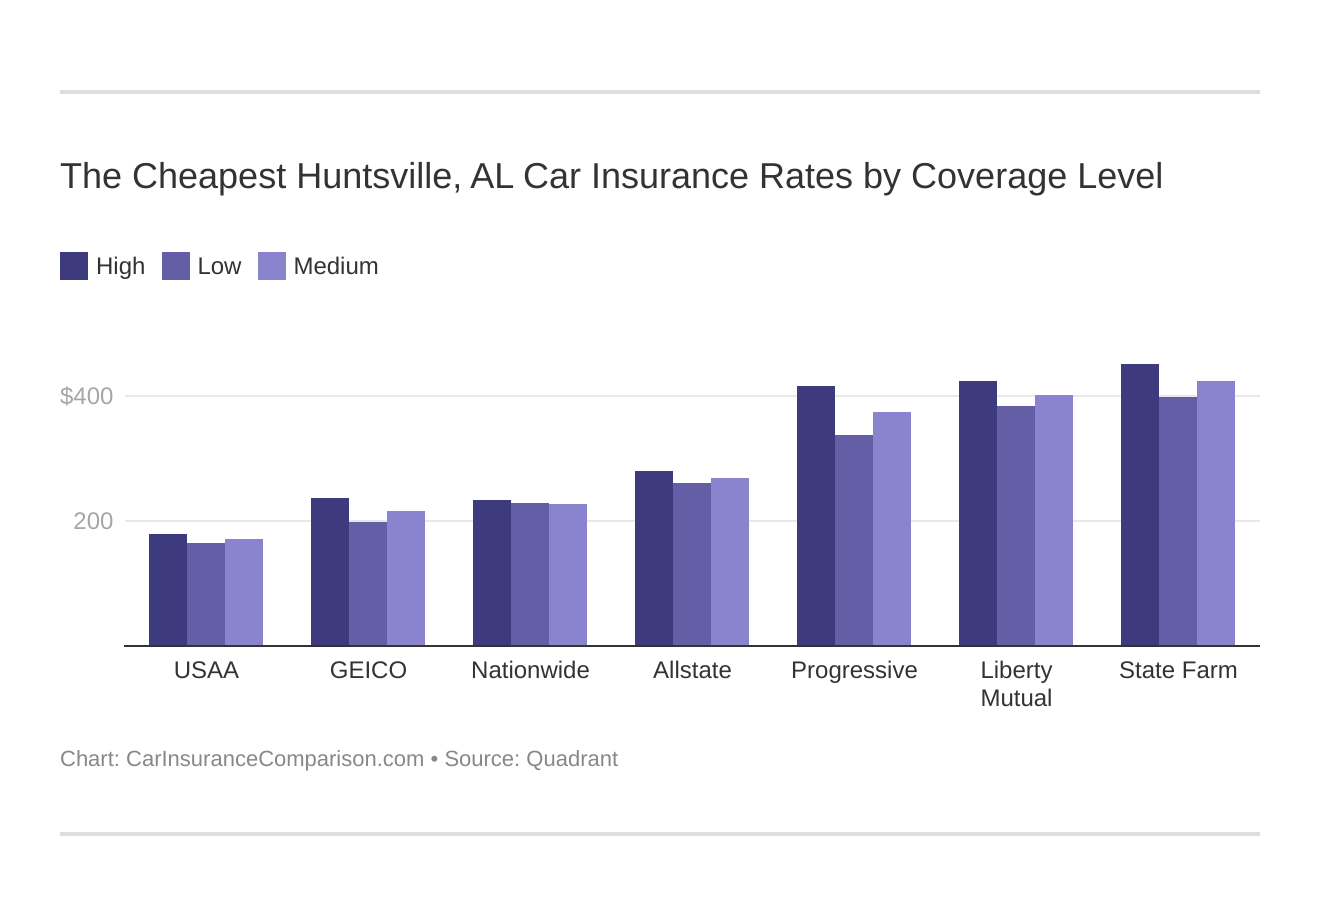 The Cheapest Huntsville, AL Car Insurance Rates by Coverage Level